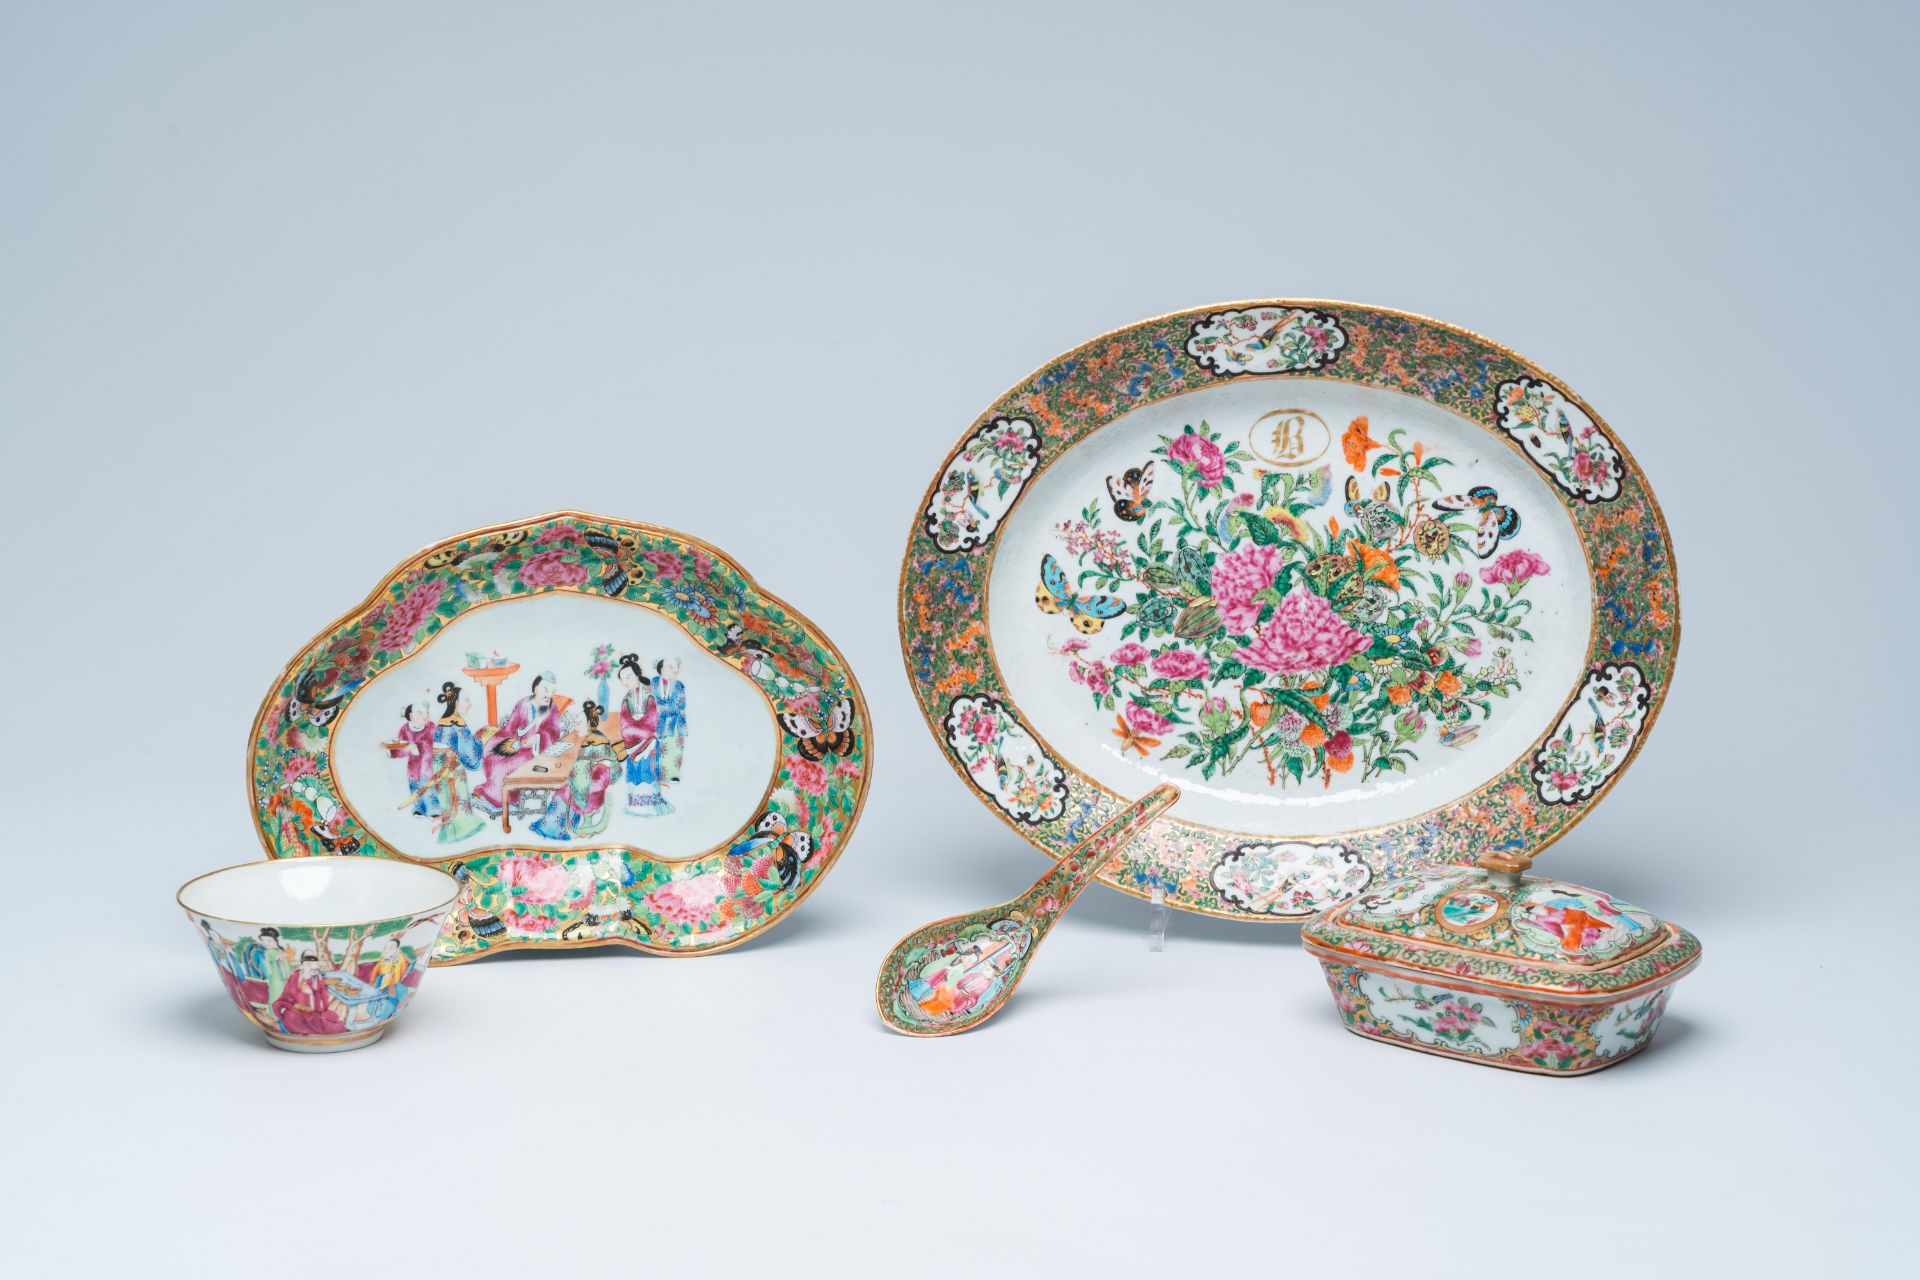 A varied collection of Chinese Canton famille rose porcelain with floral design and figures, 19th C.